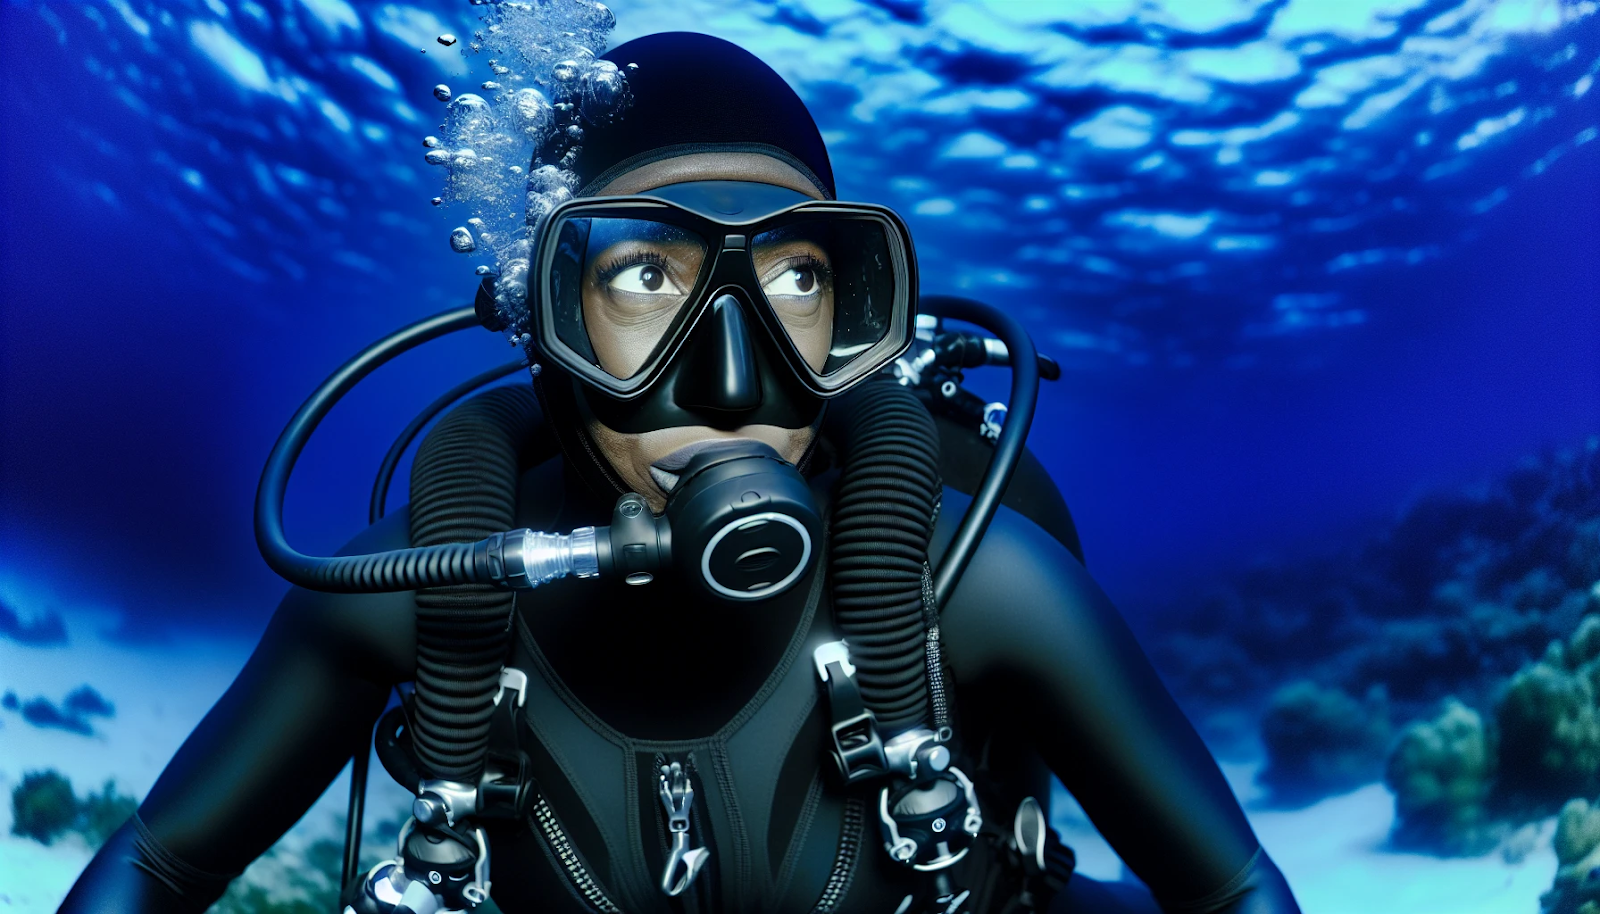 An advanced diver in a high-performance drysuit exploring the deep ocean